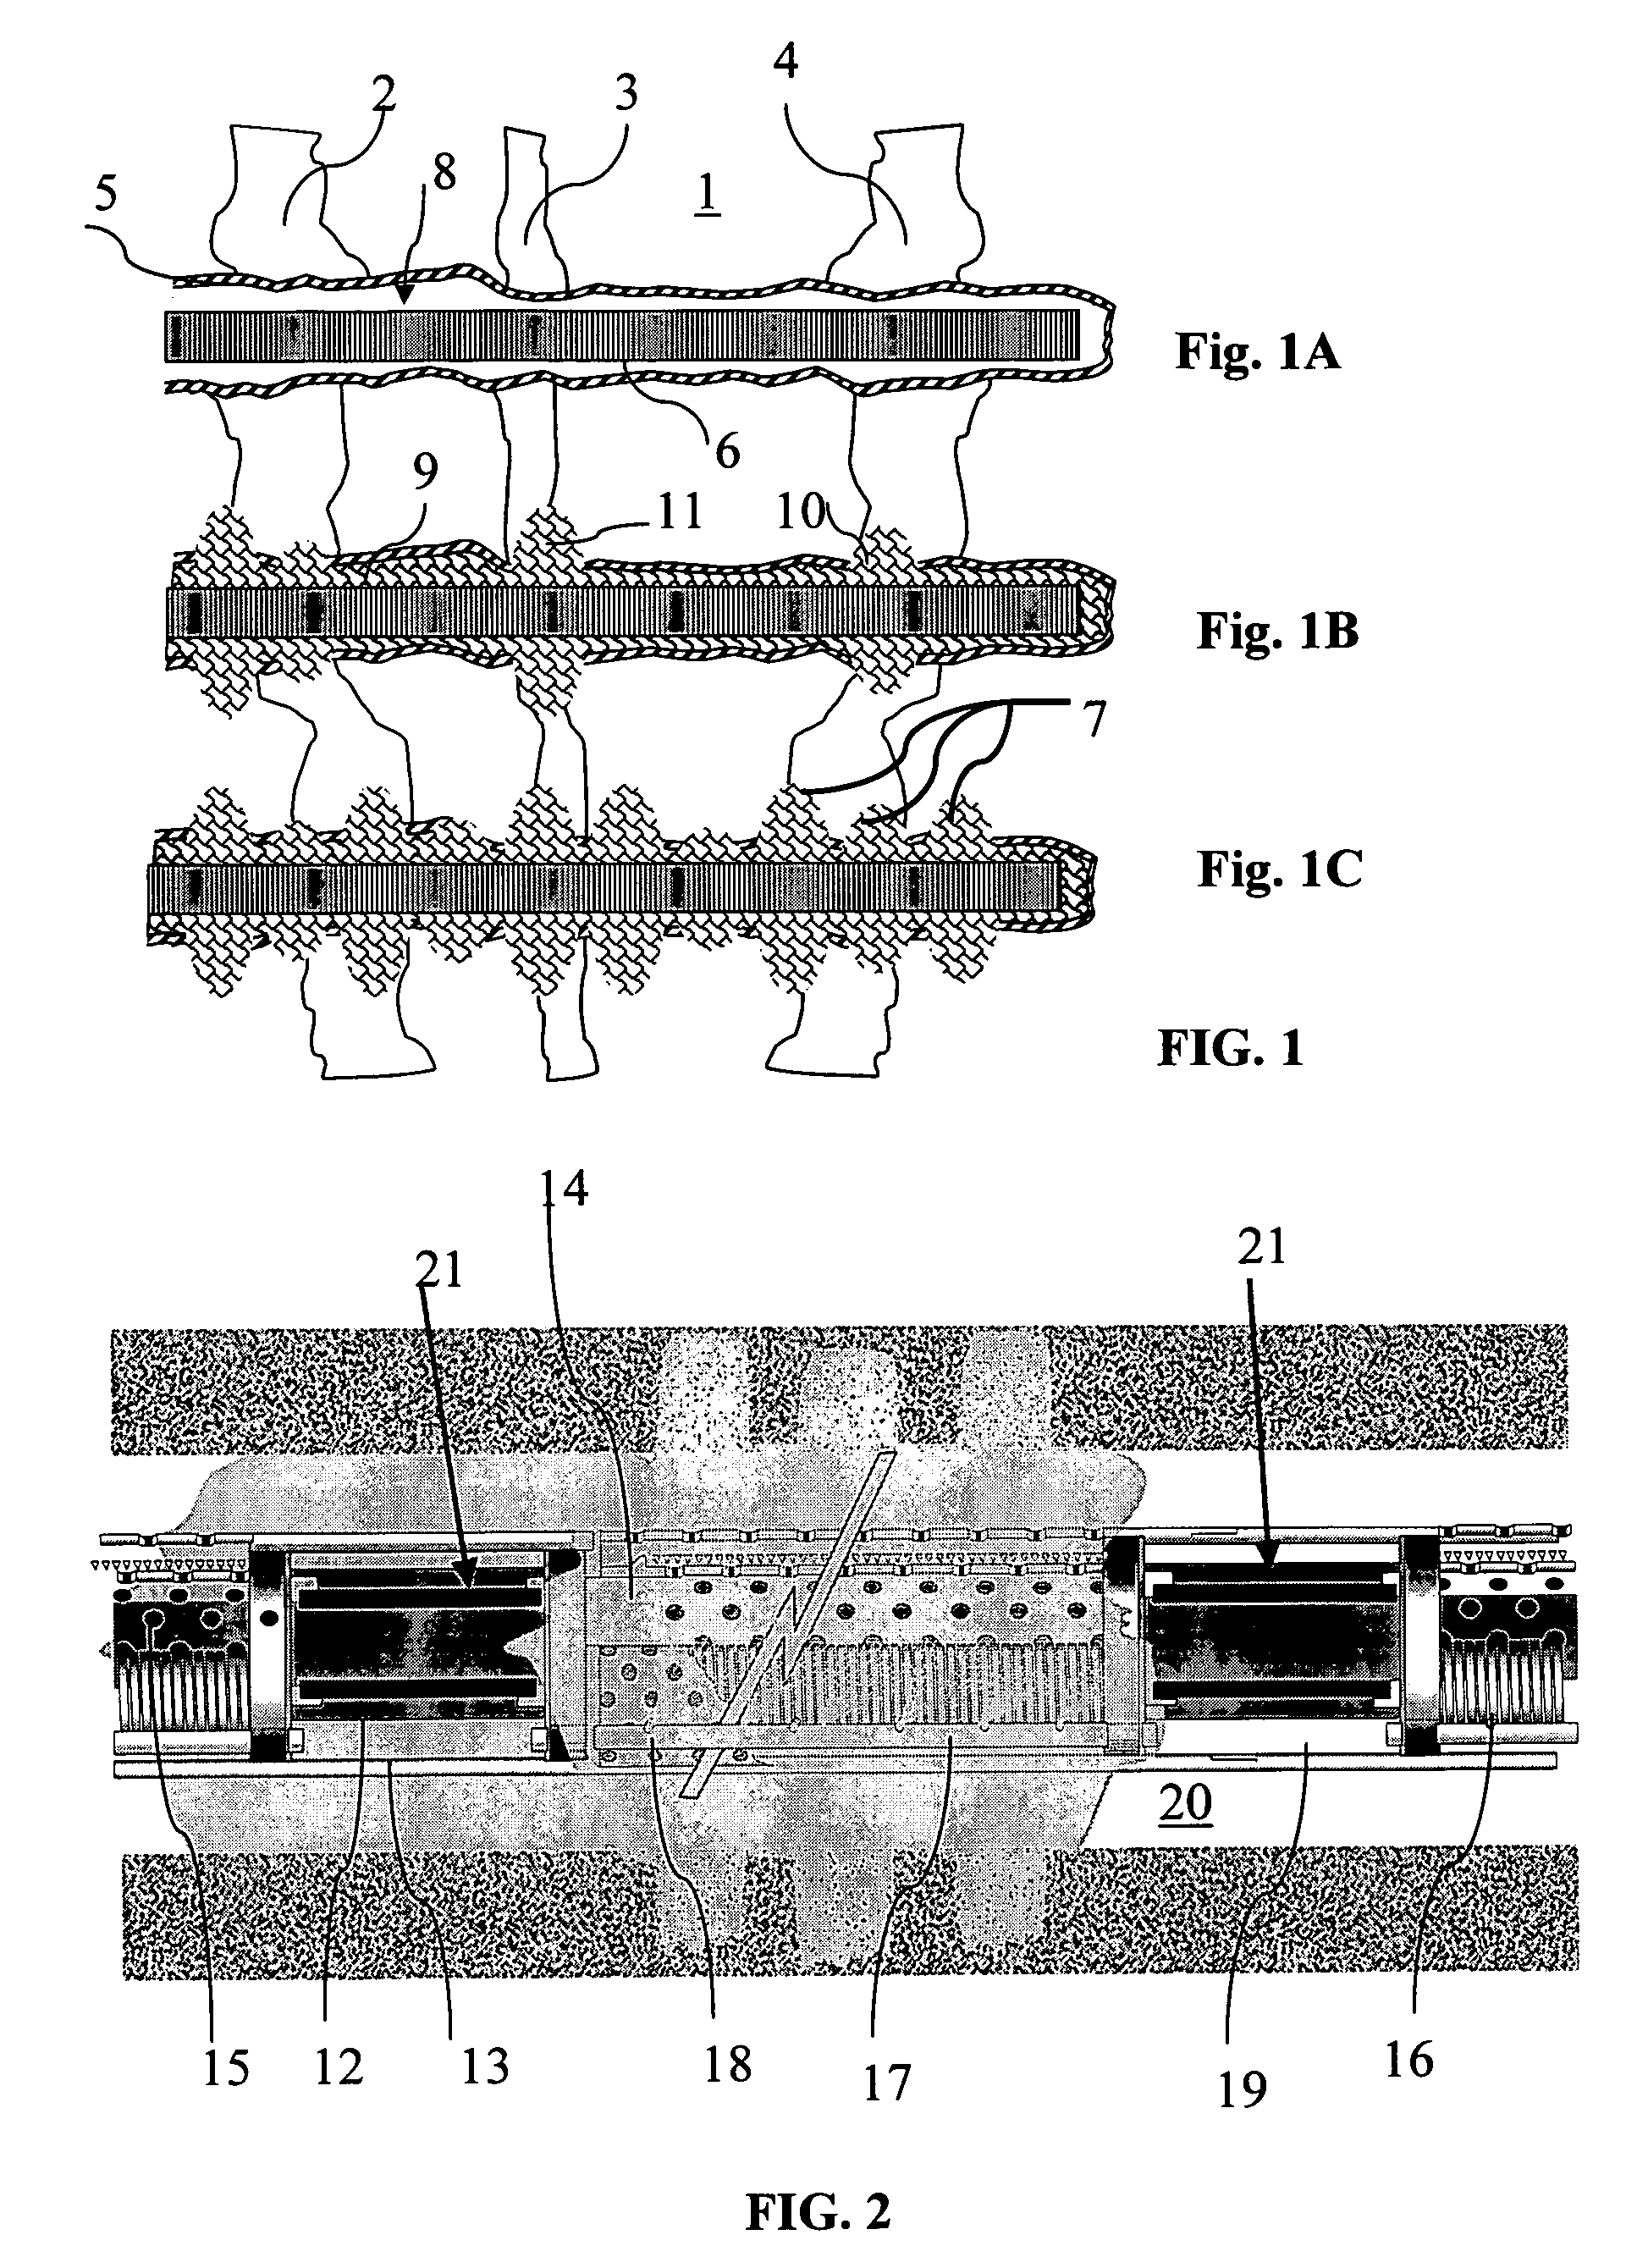 Method and gravel packing open holes above fracturing pressure